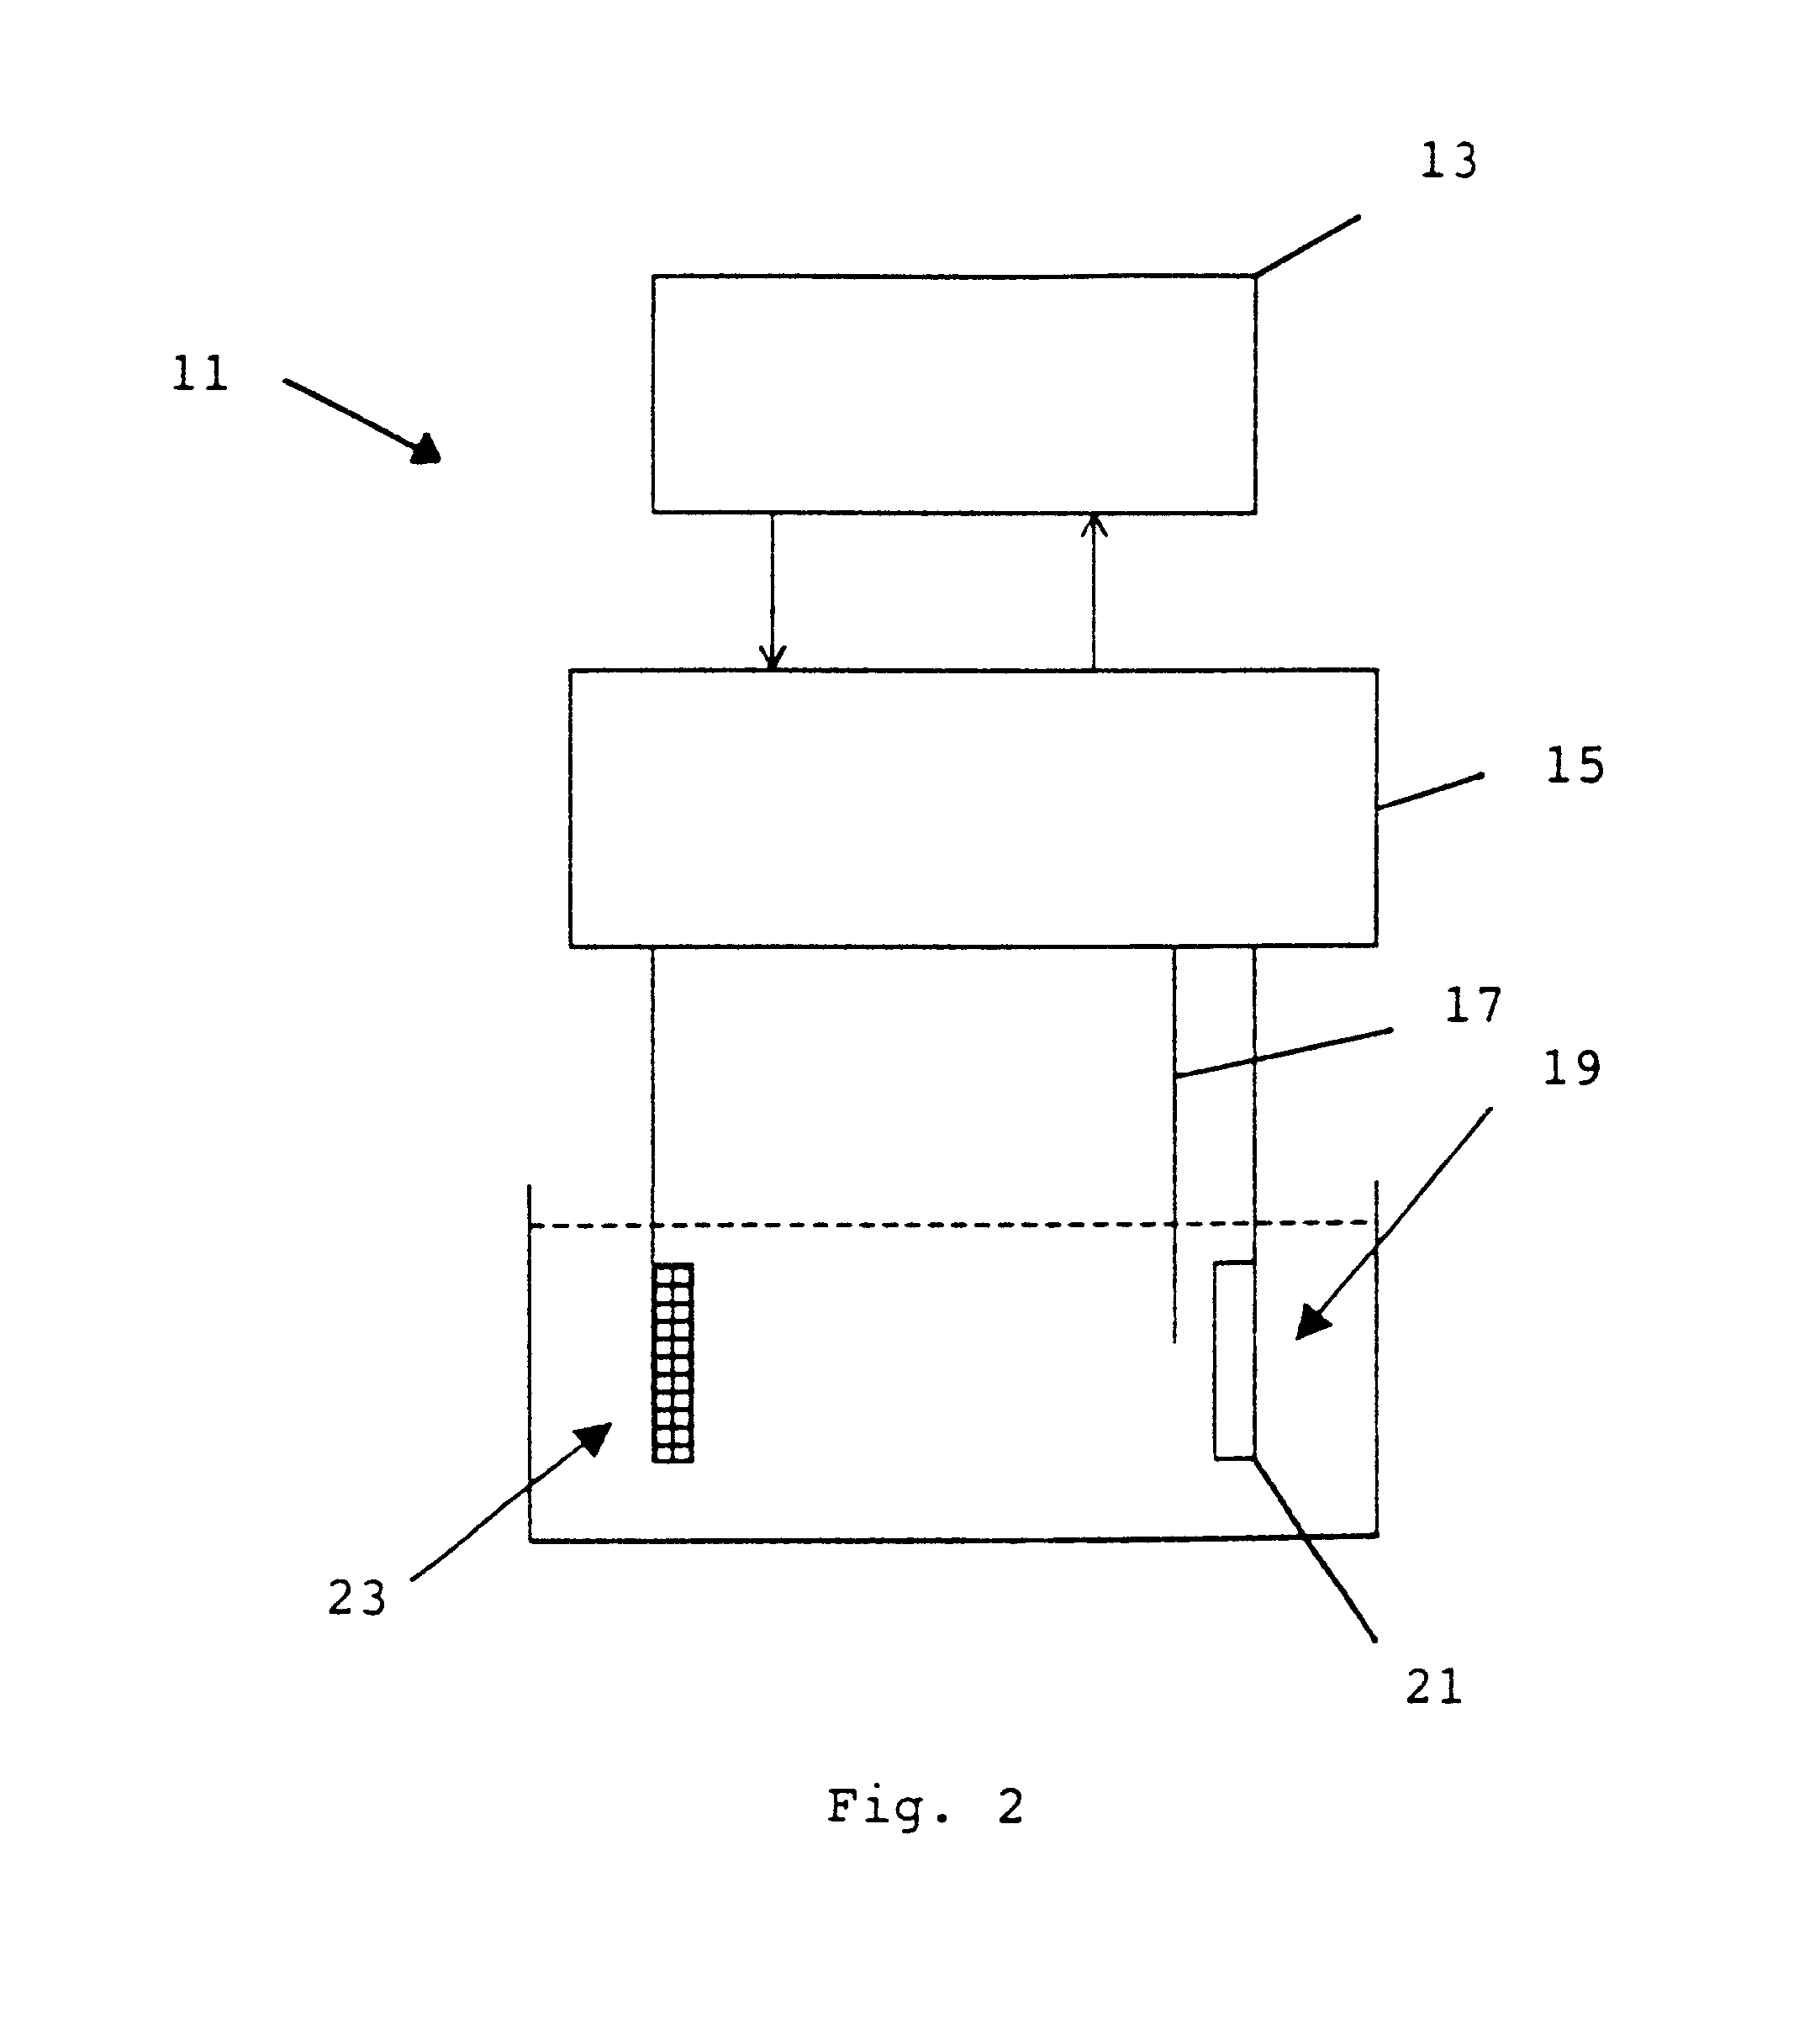 Spin-valve structure and method for making spin-valve structures